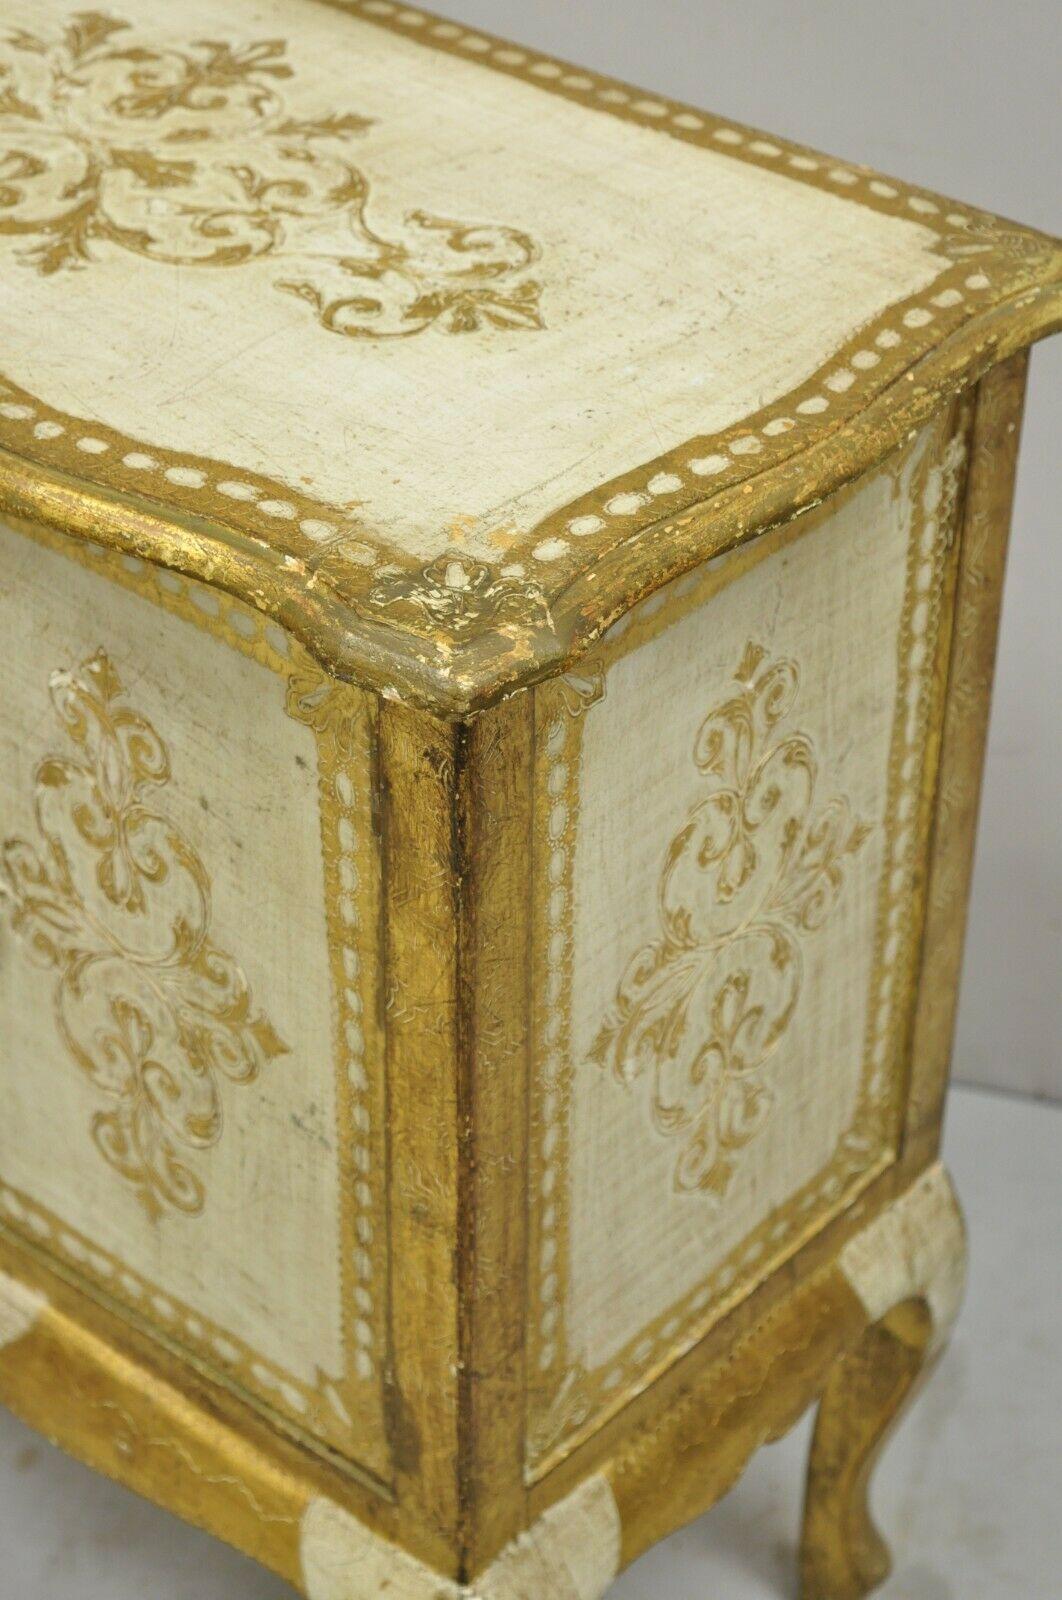 Wood Vintage Italian Florentine Cream and Gold Small Nightstand Side Table Cabinet